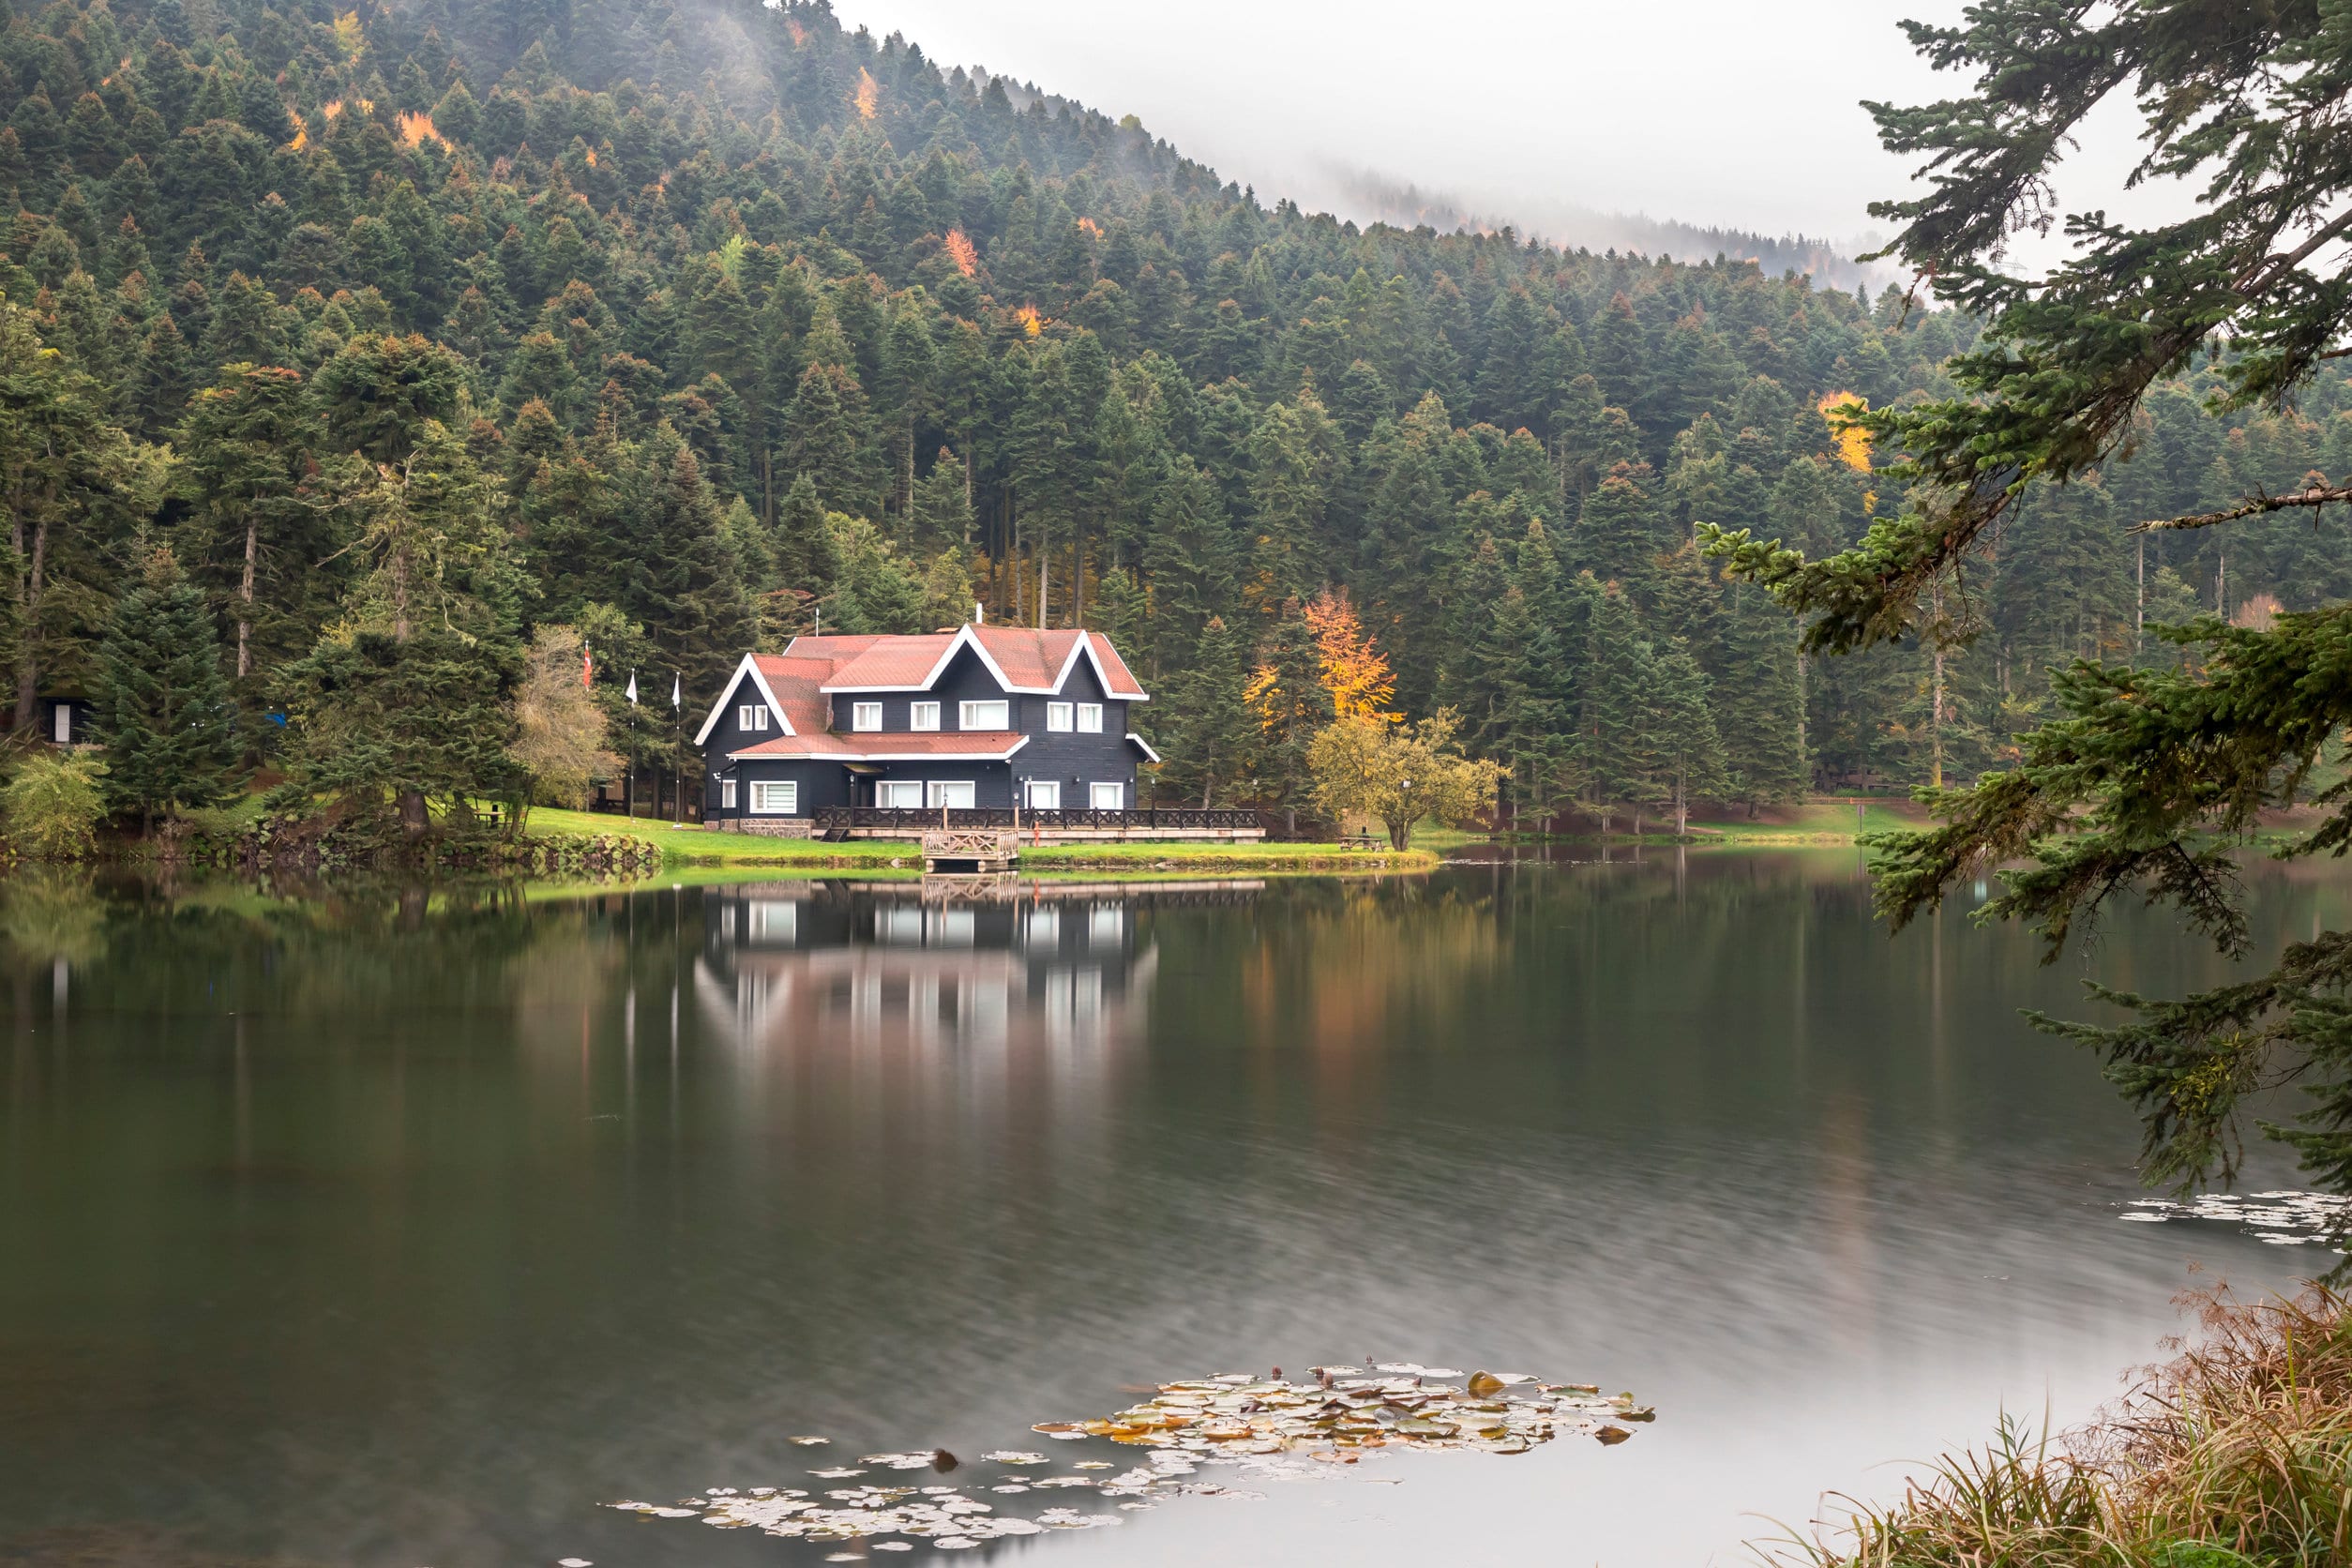 House on lake in front of mountains